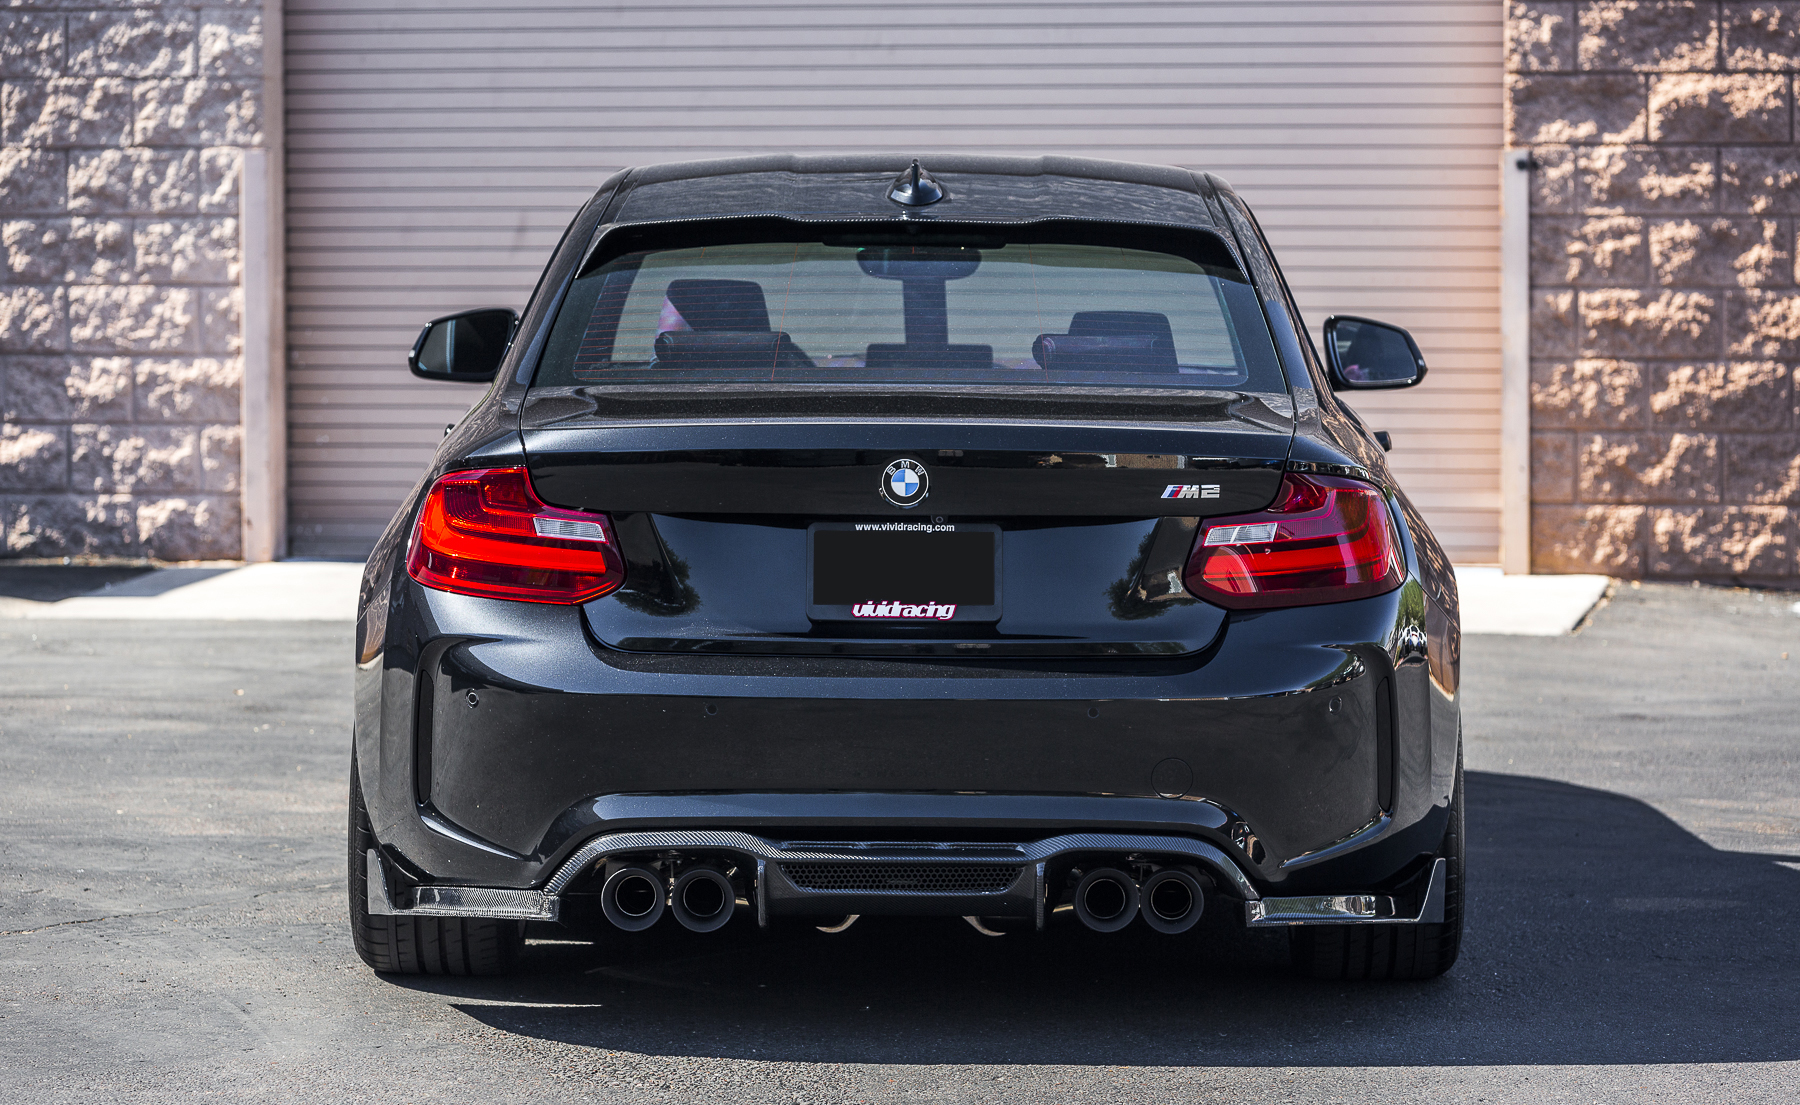 BMW_M2_Diffuser_RoofSpoiler-11